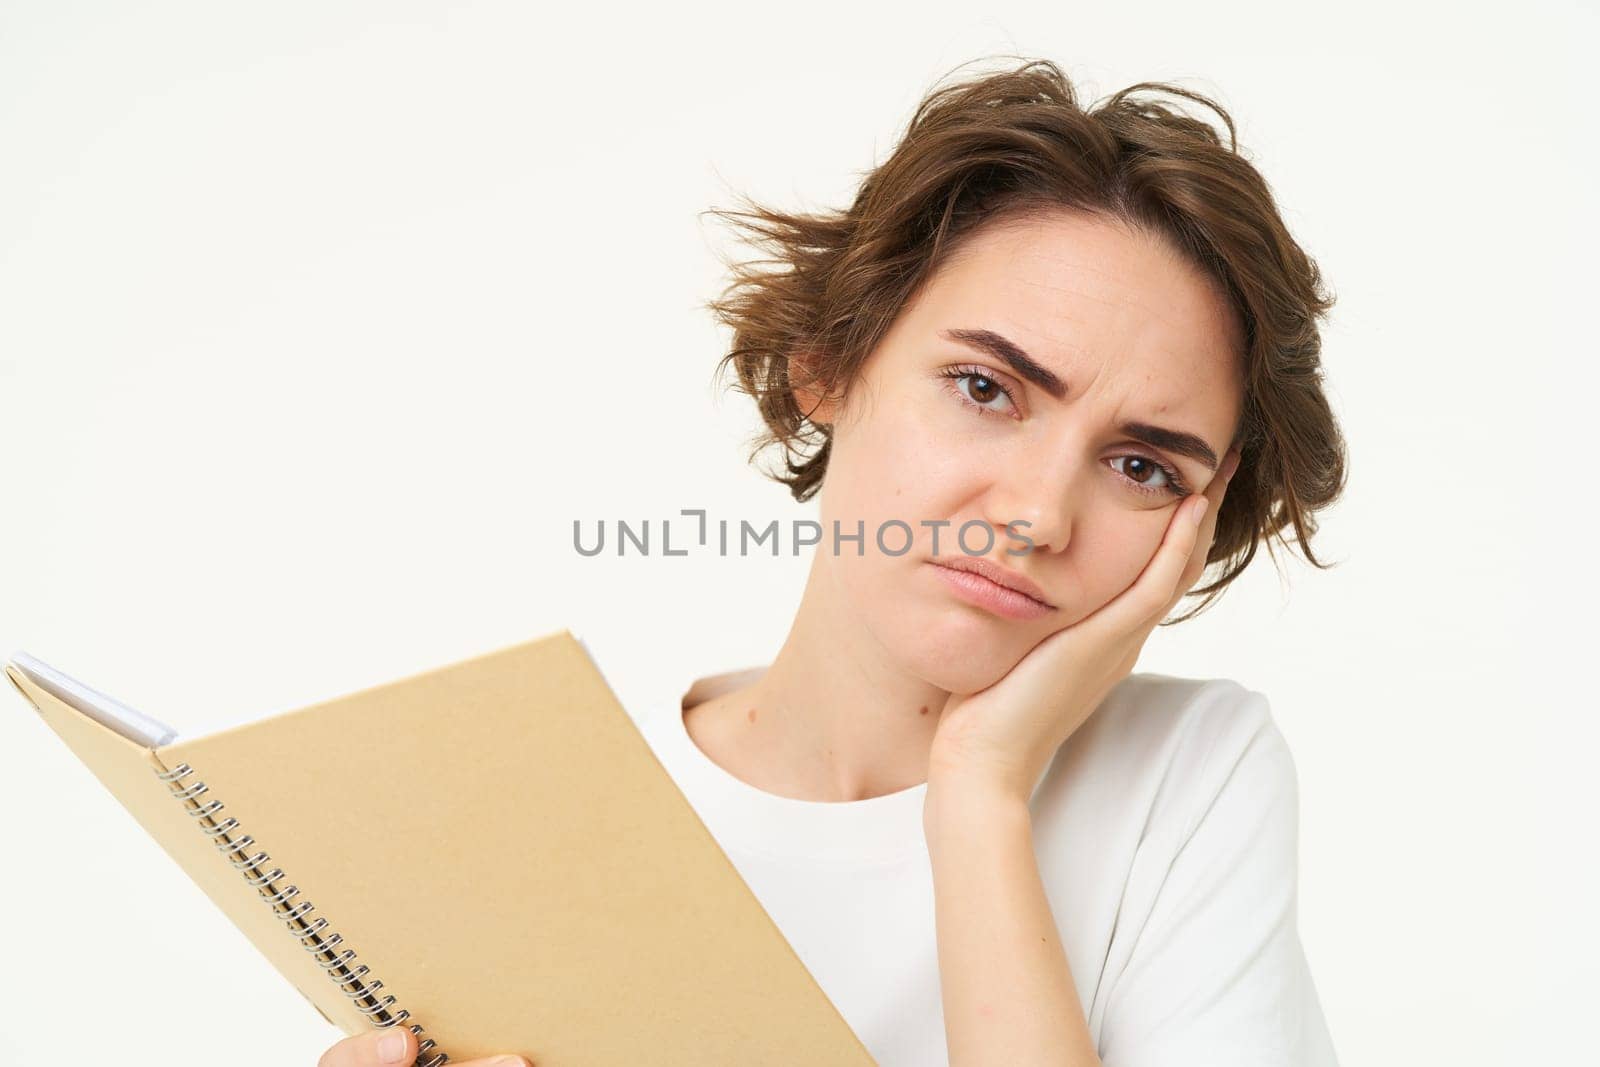 Image of troubled, upset young woman, student looks complicated, holds reading material homework, frowning with stressed face expression, standing over white background.